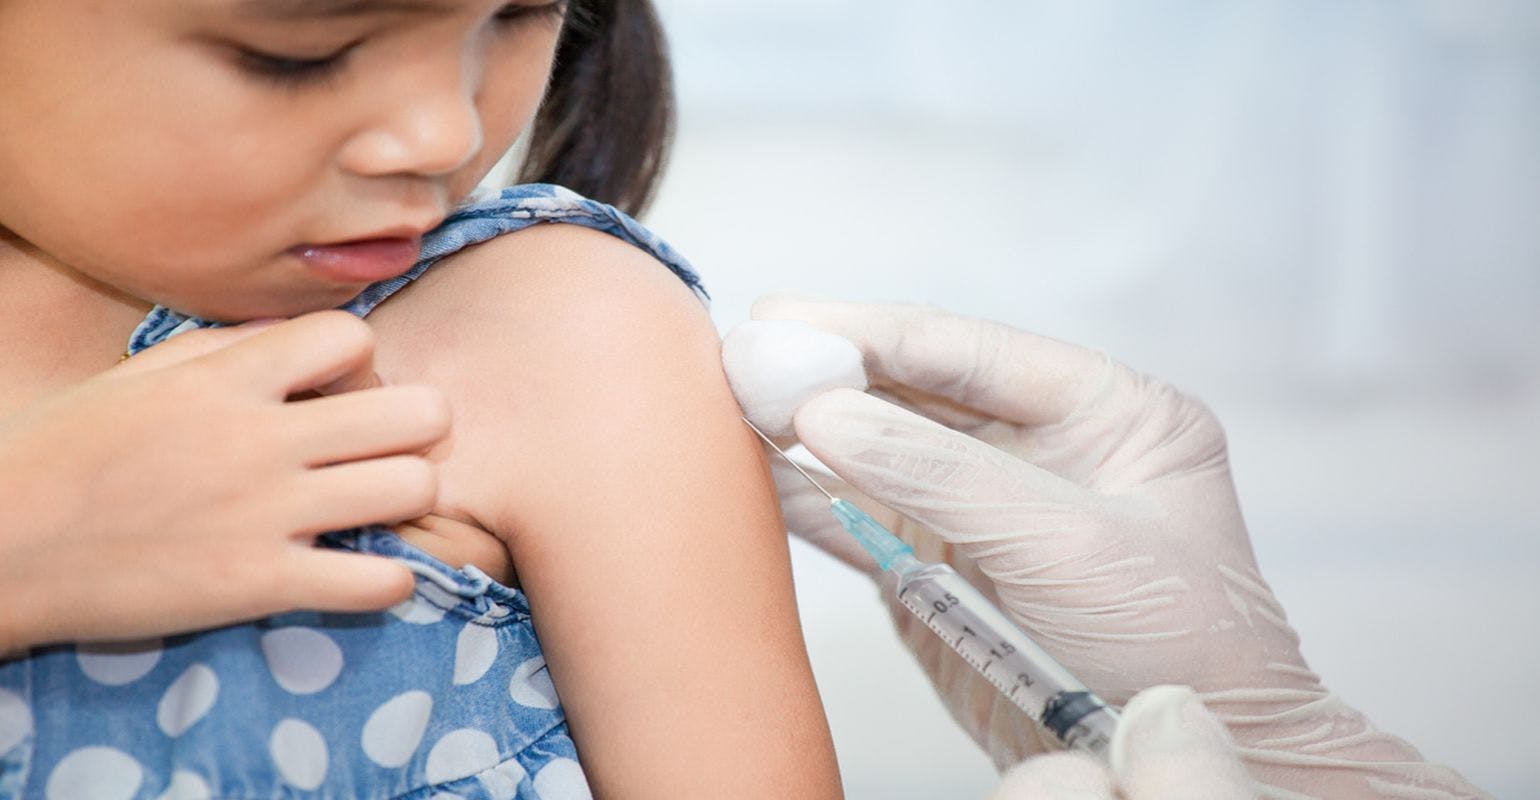 Repeat Vaccination is Safe for Most Kids With Mild to Moderate Reactions